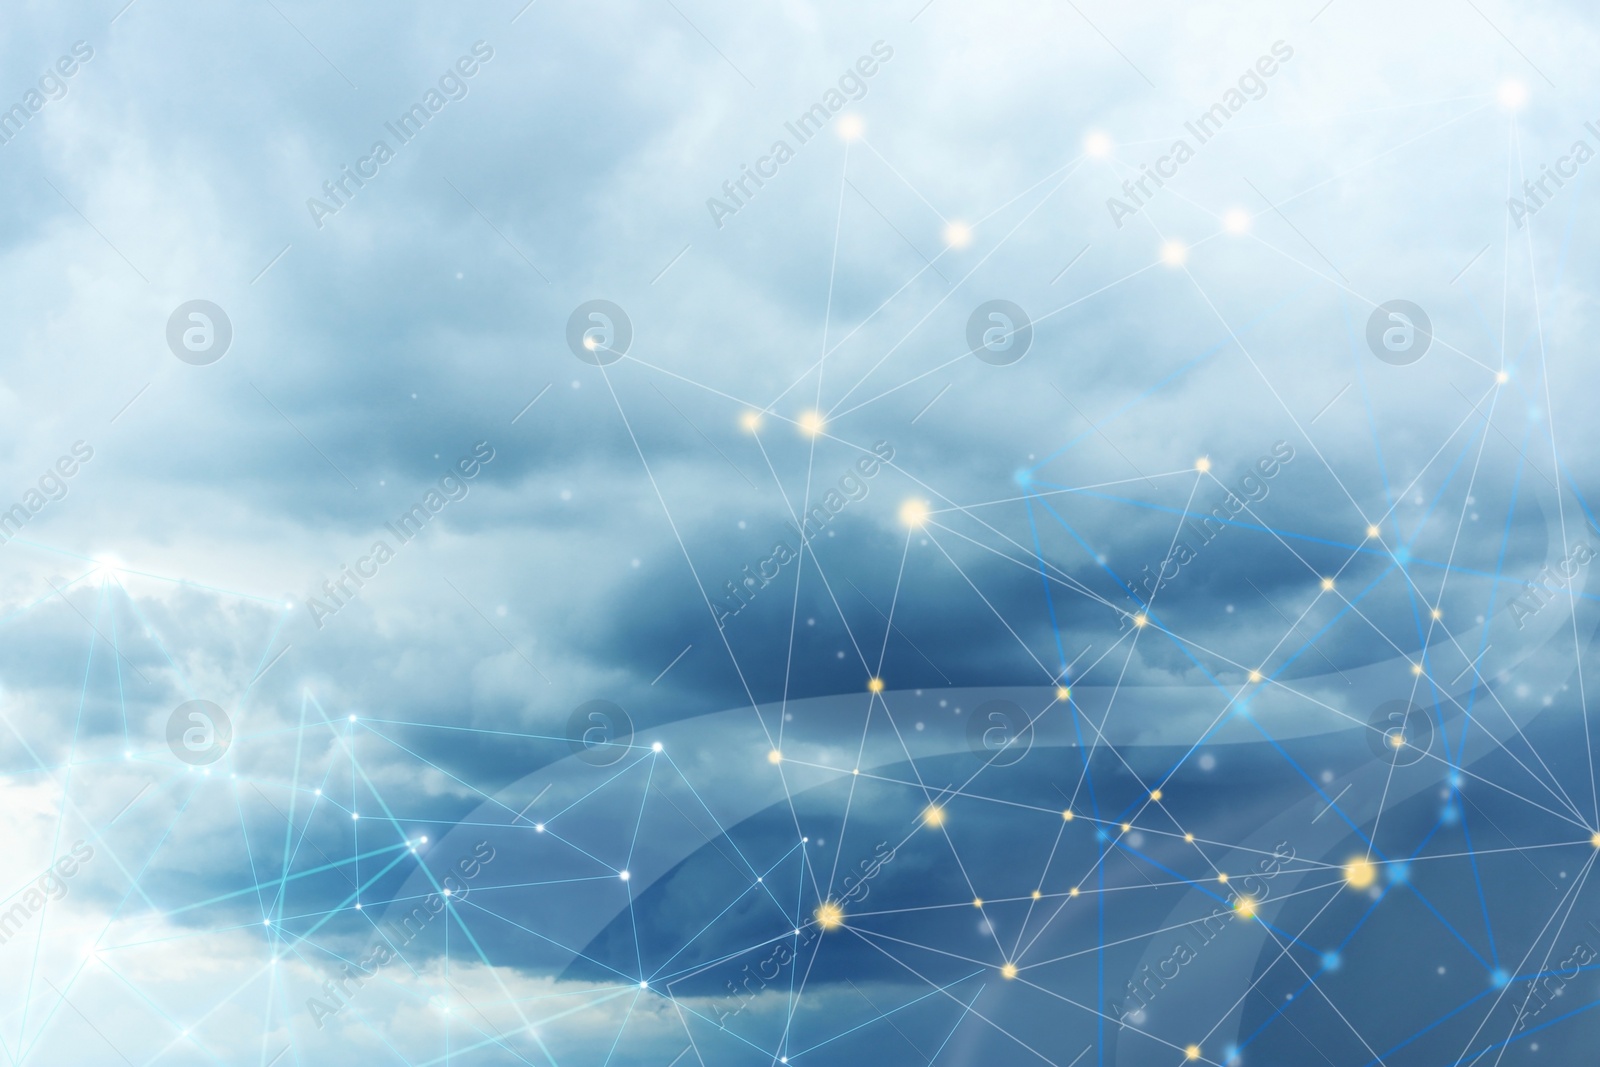 Image of Sky on grey day and network connection lines. Cloud technology